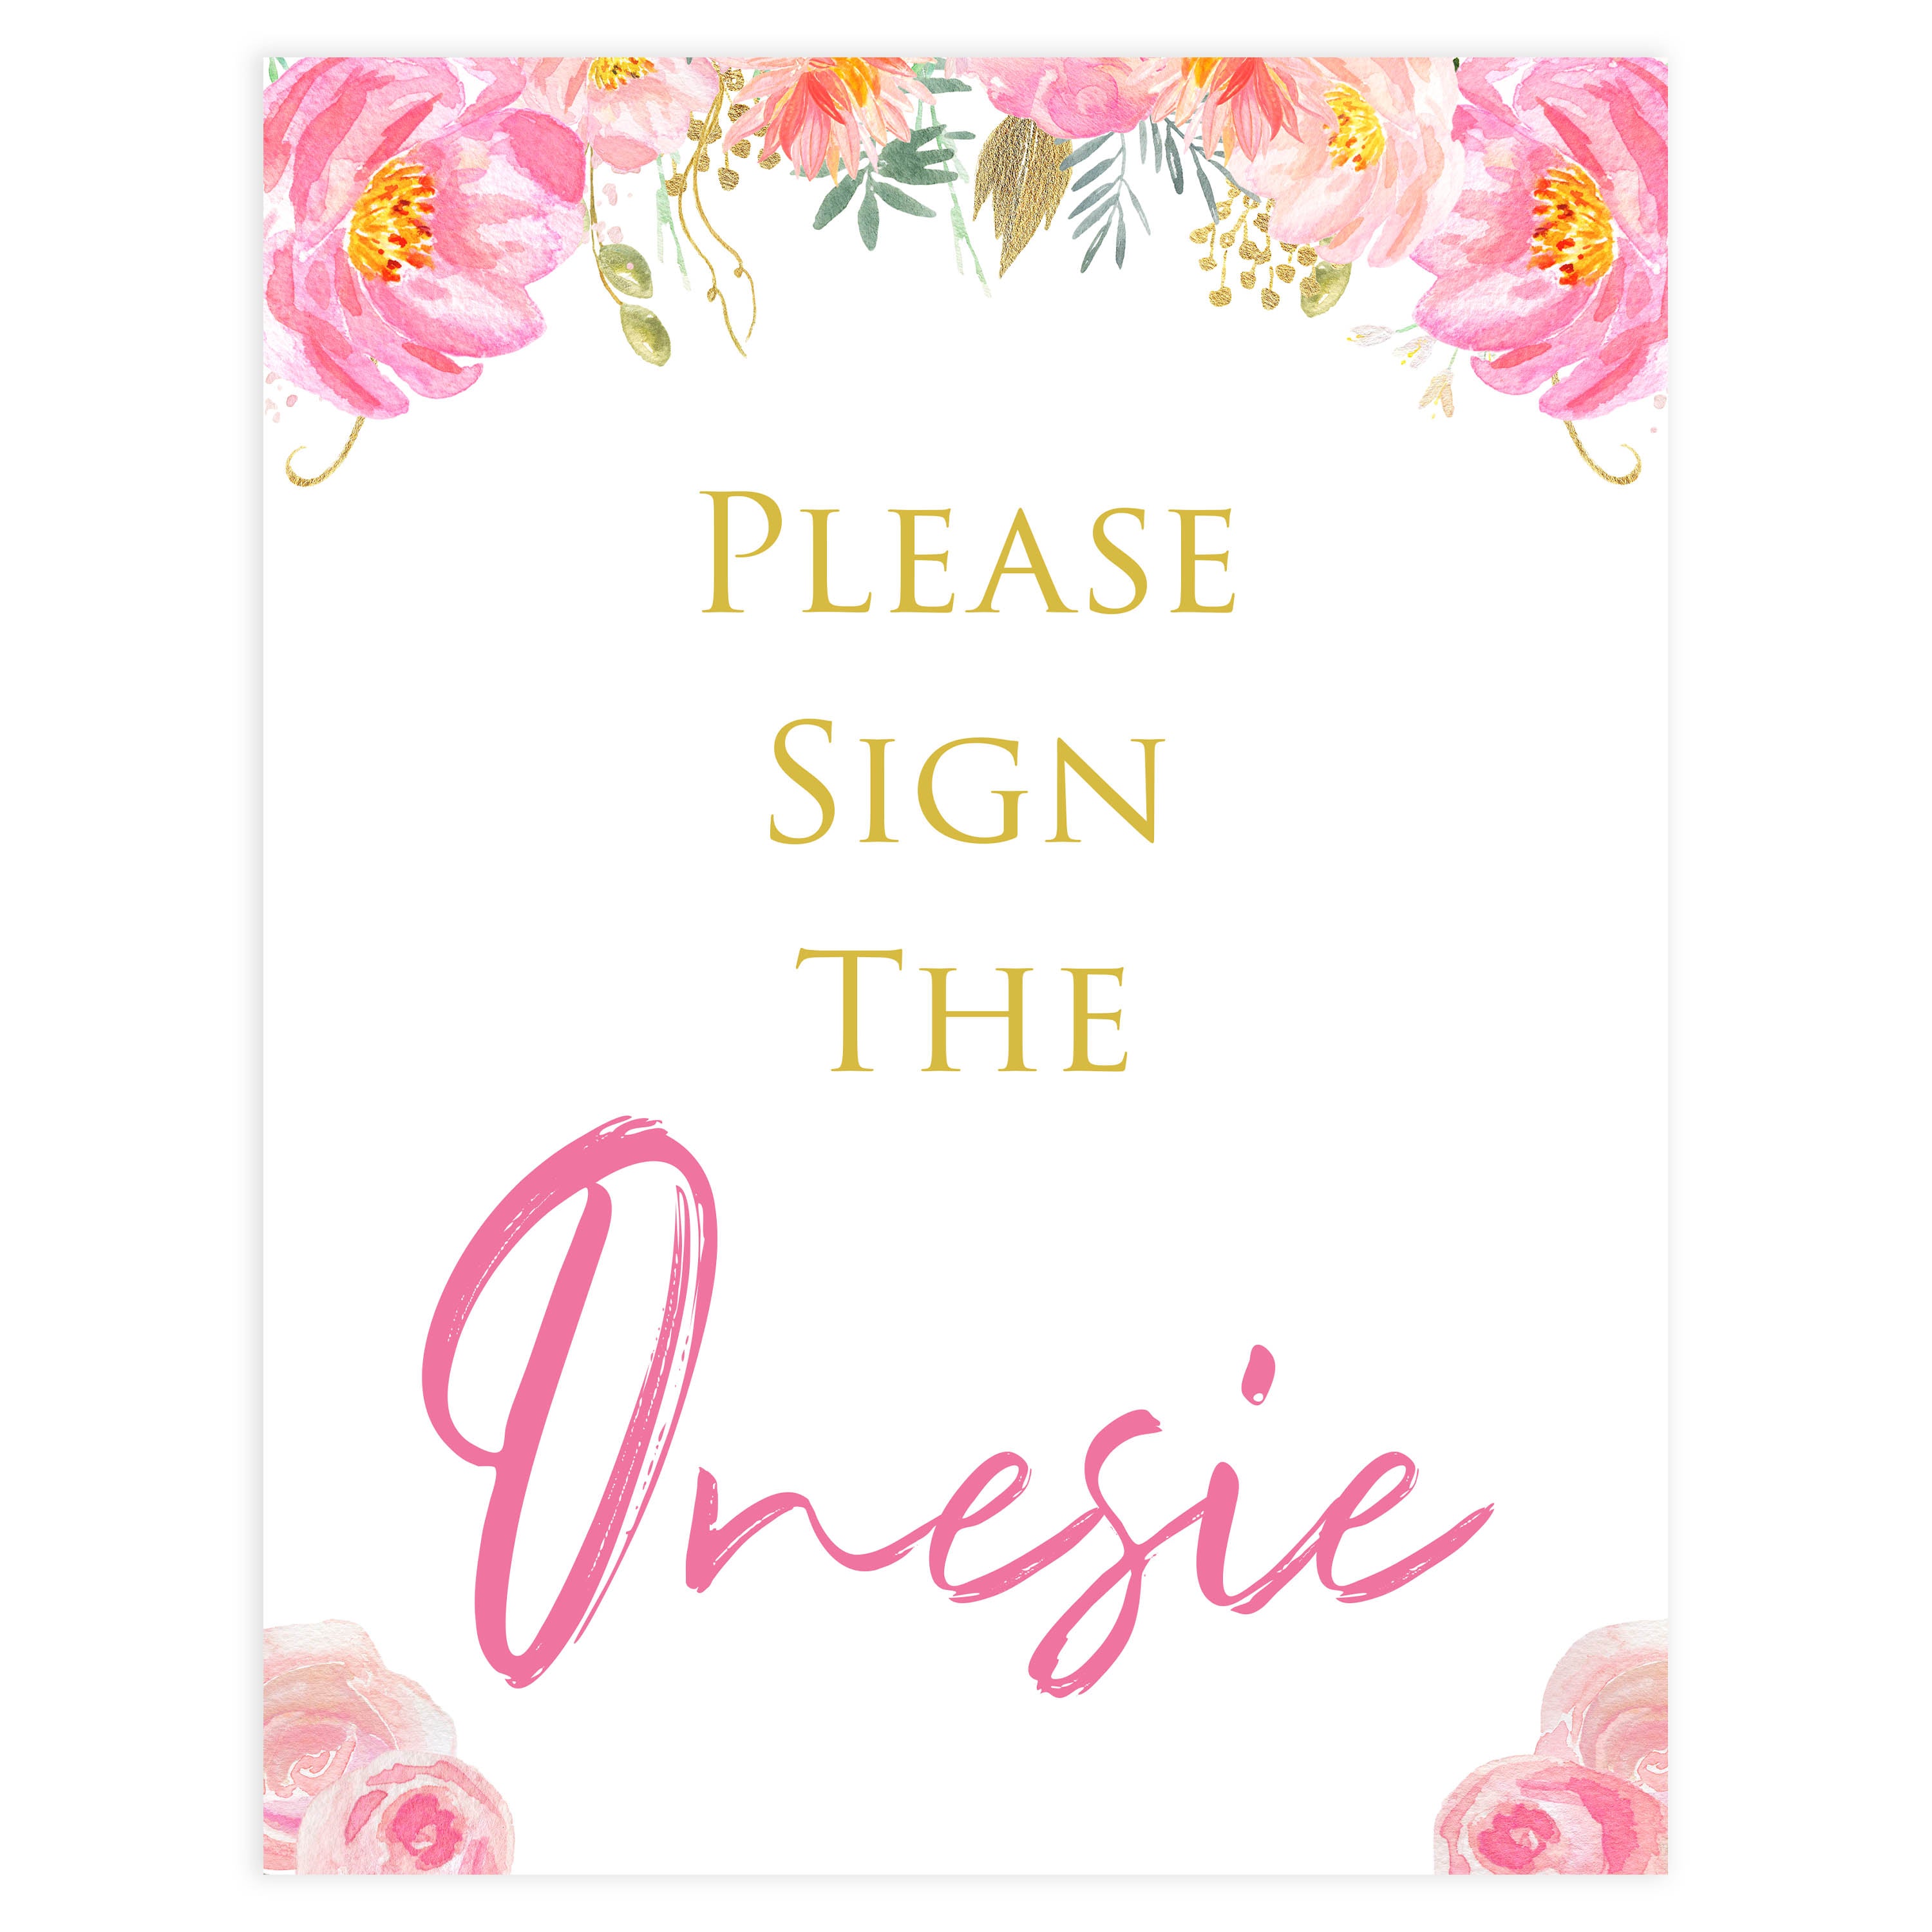 Please sign the onesie, sign the onesie, Printable baby shower games, blush floral fun baby games, baby shower games, fun baby shower ideas, top baby shower ideas, blush baby shower, blue baby shower ideas